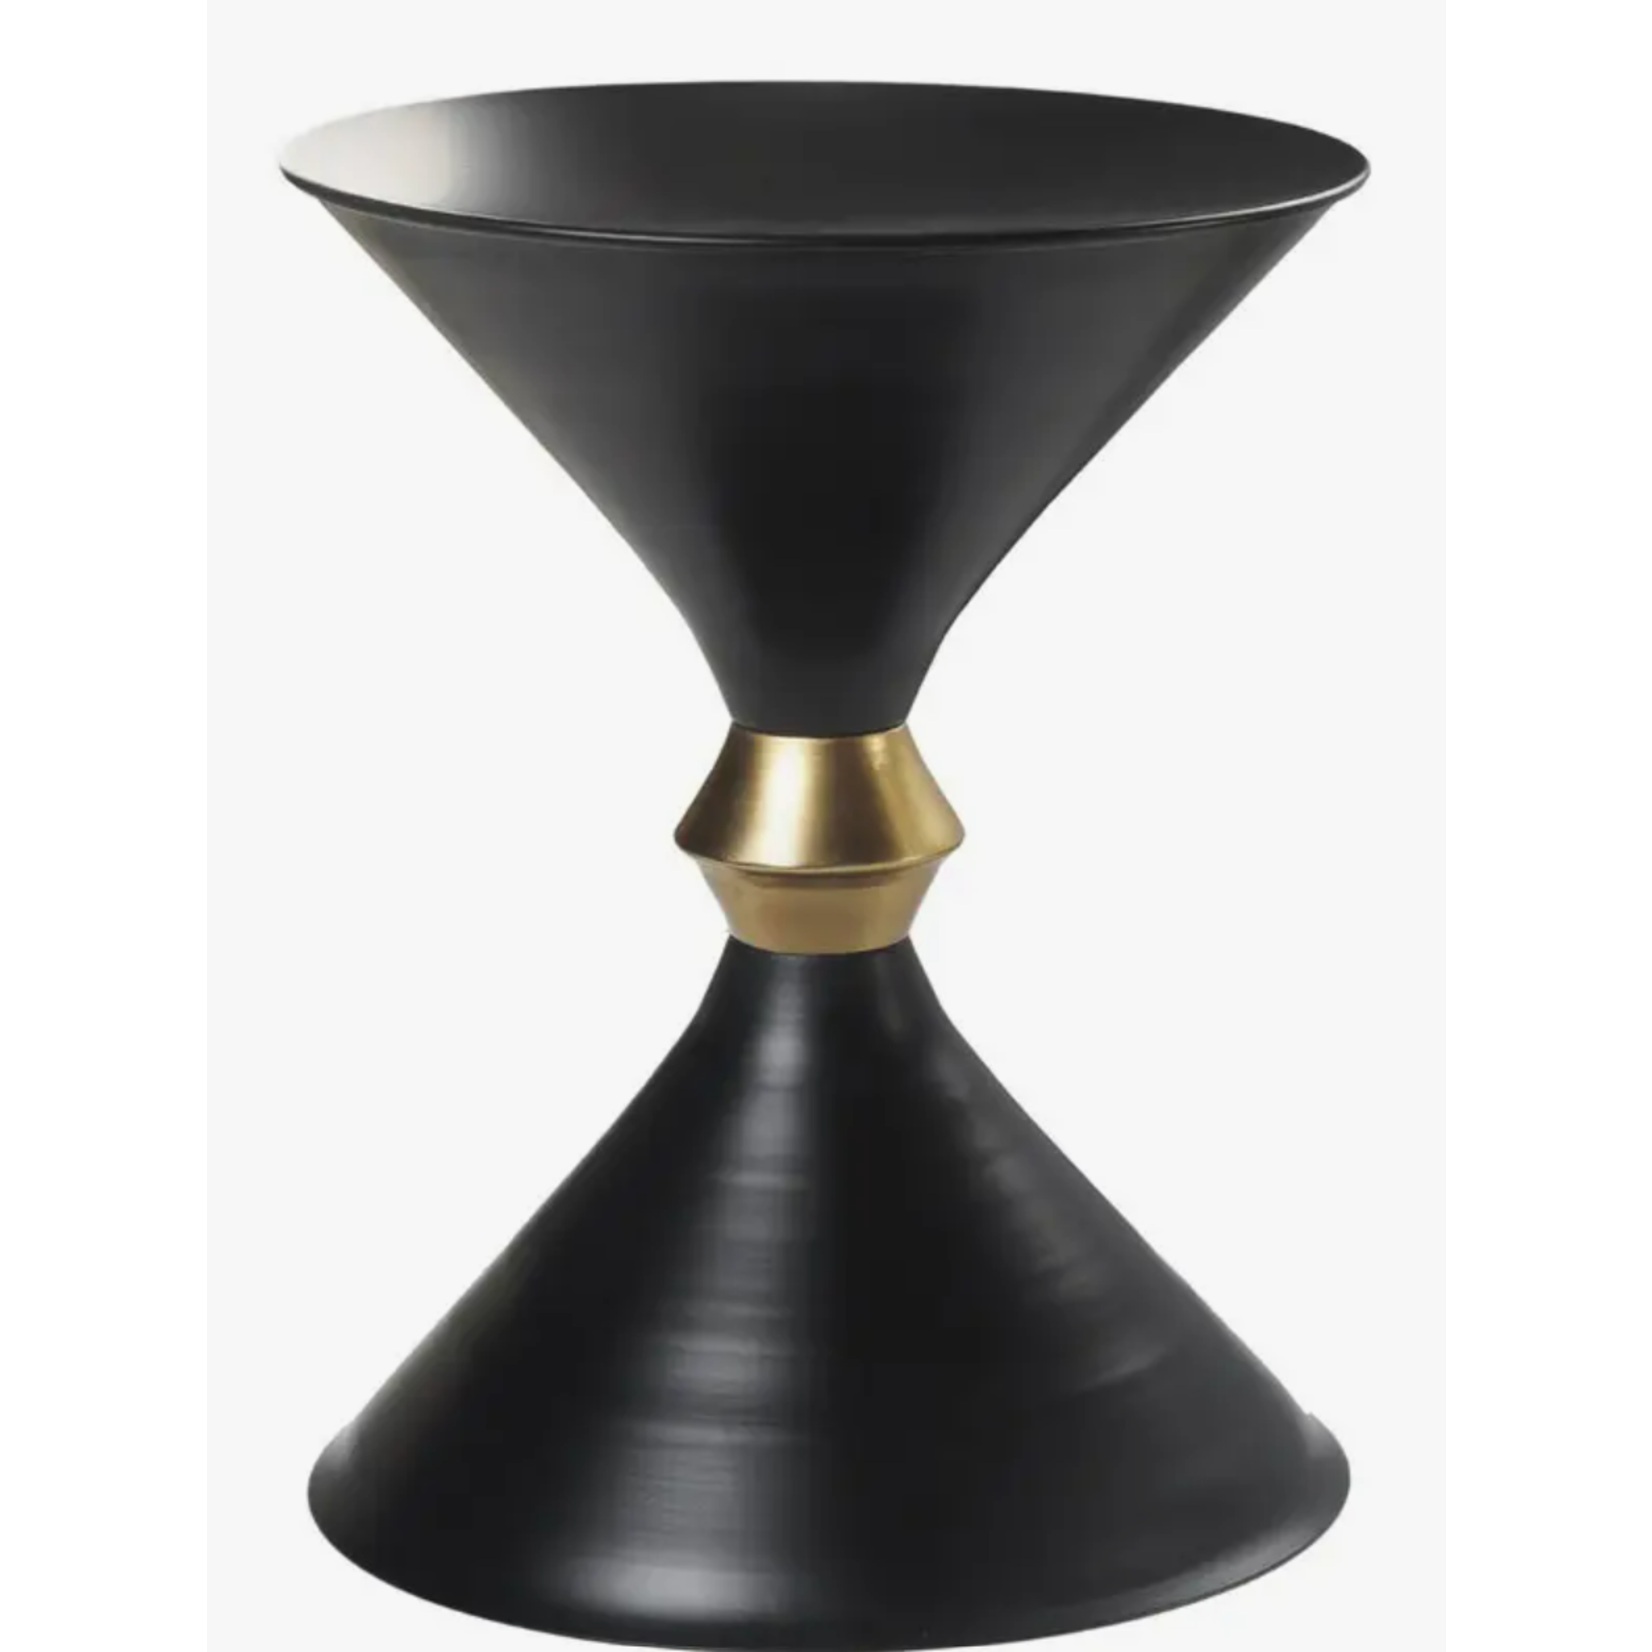 MODERN BLACK AND GOLD DRUM SIDE TABLE